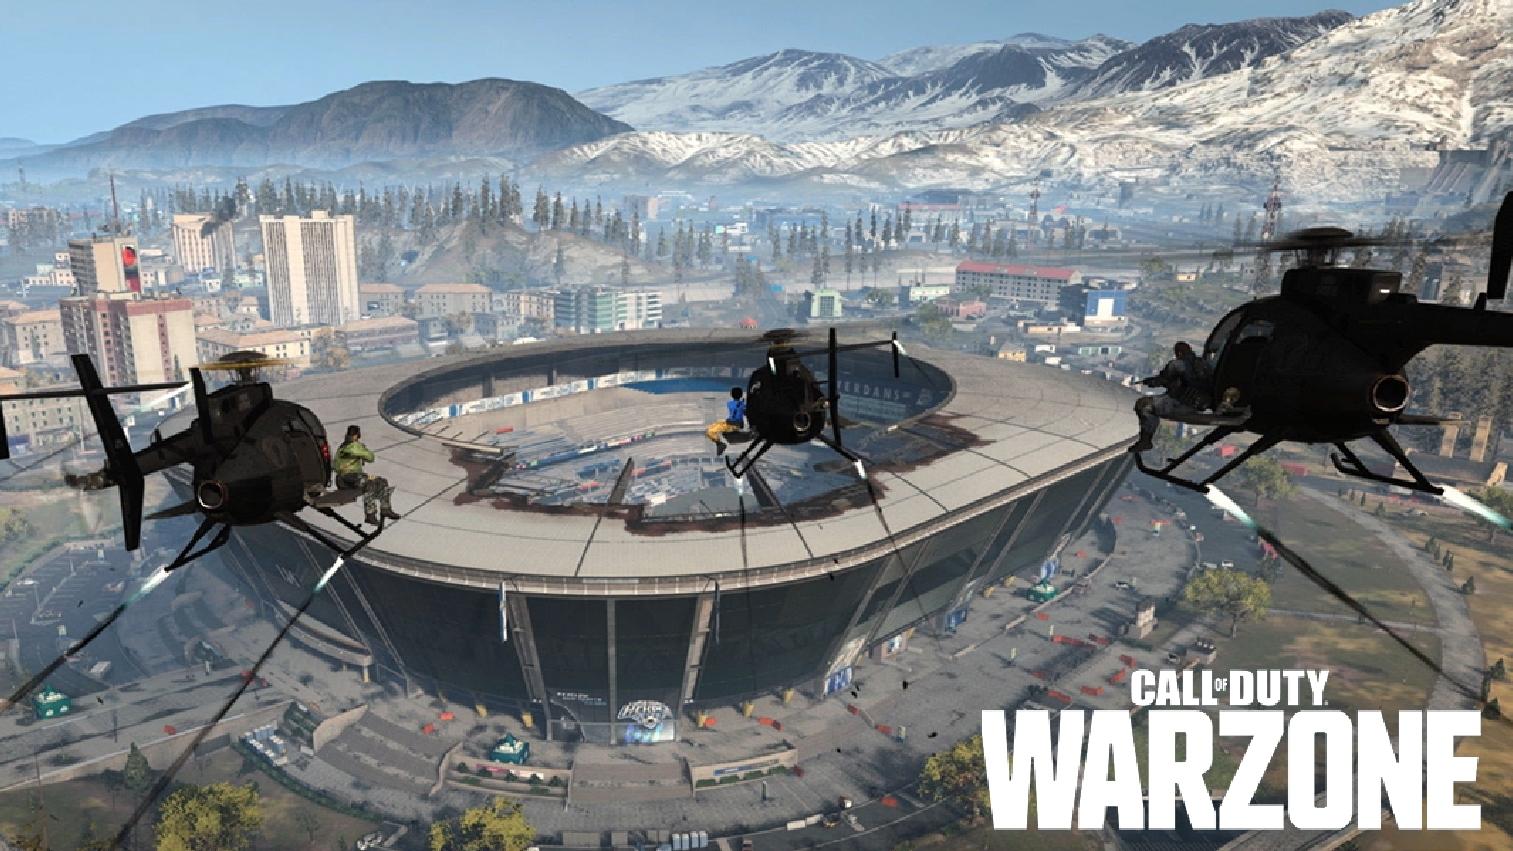 warzone Stadium with helicopters in season 5